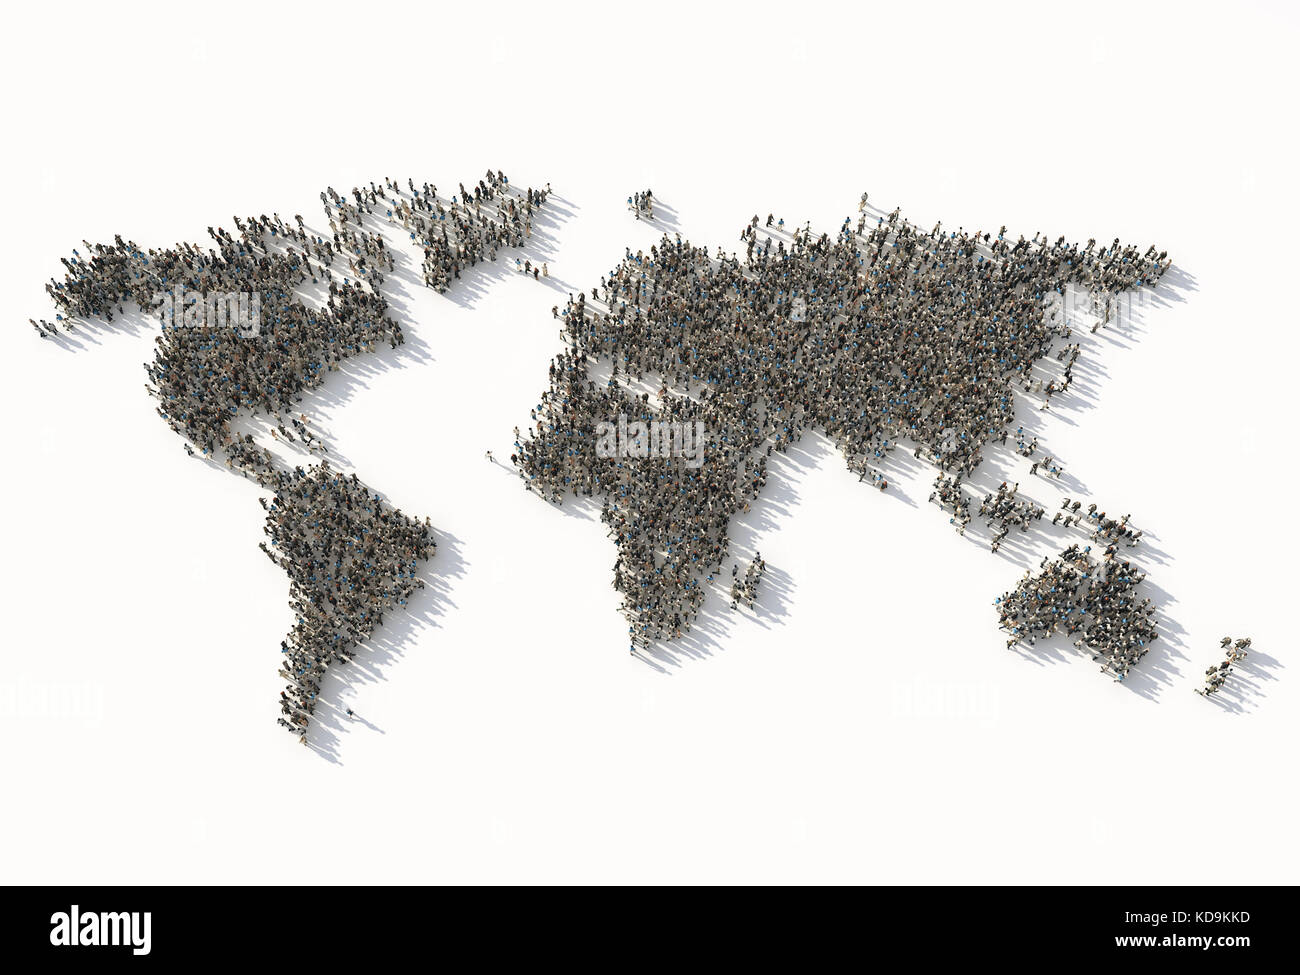 crowd  as a world map Stock Photo